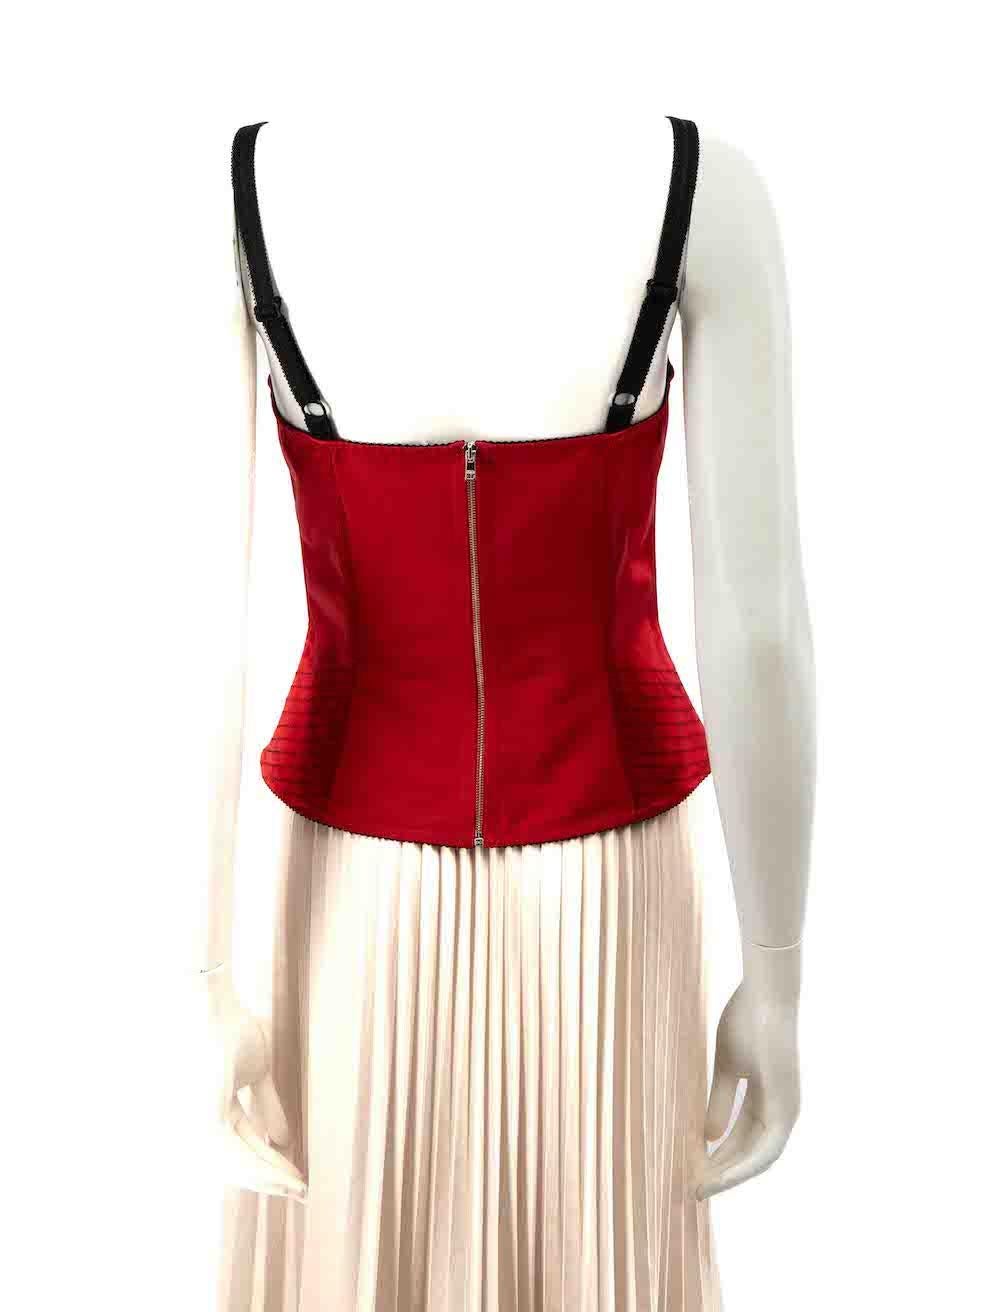 Dolce & Gabbana Red Striped Stitching Corset Size M In Excellent Condition For Sale In London, GB